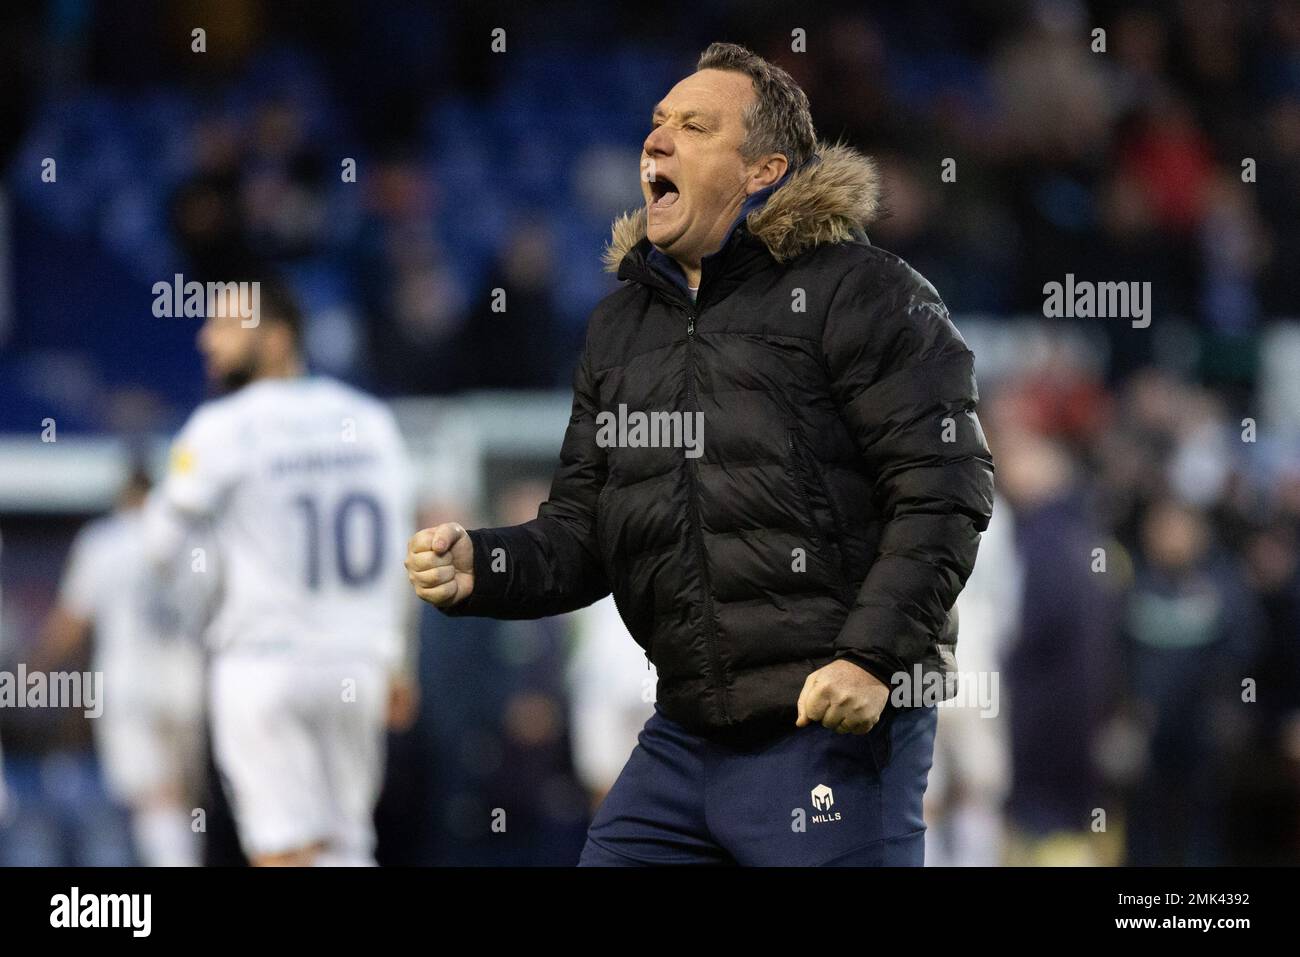 Mickey Mellon manager of Tranmere Rovers celebrates with the home fans after the Sky Bet League 2 match Tranmere Rovers vs Leyton Orient at Prenton Park, Birkenhead, United Kingdom, 28th January 2023  (Photo by Phil Bryan/Alamy Live News) Stock Photo